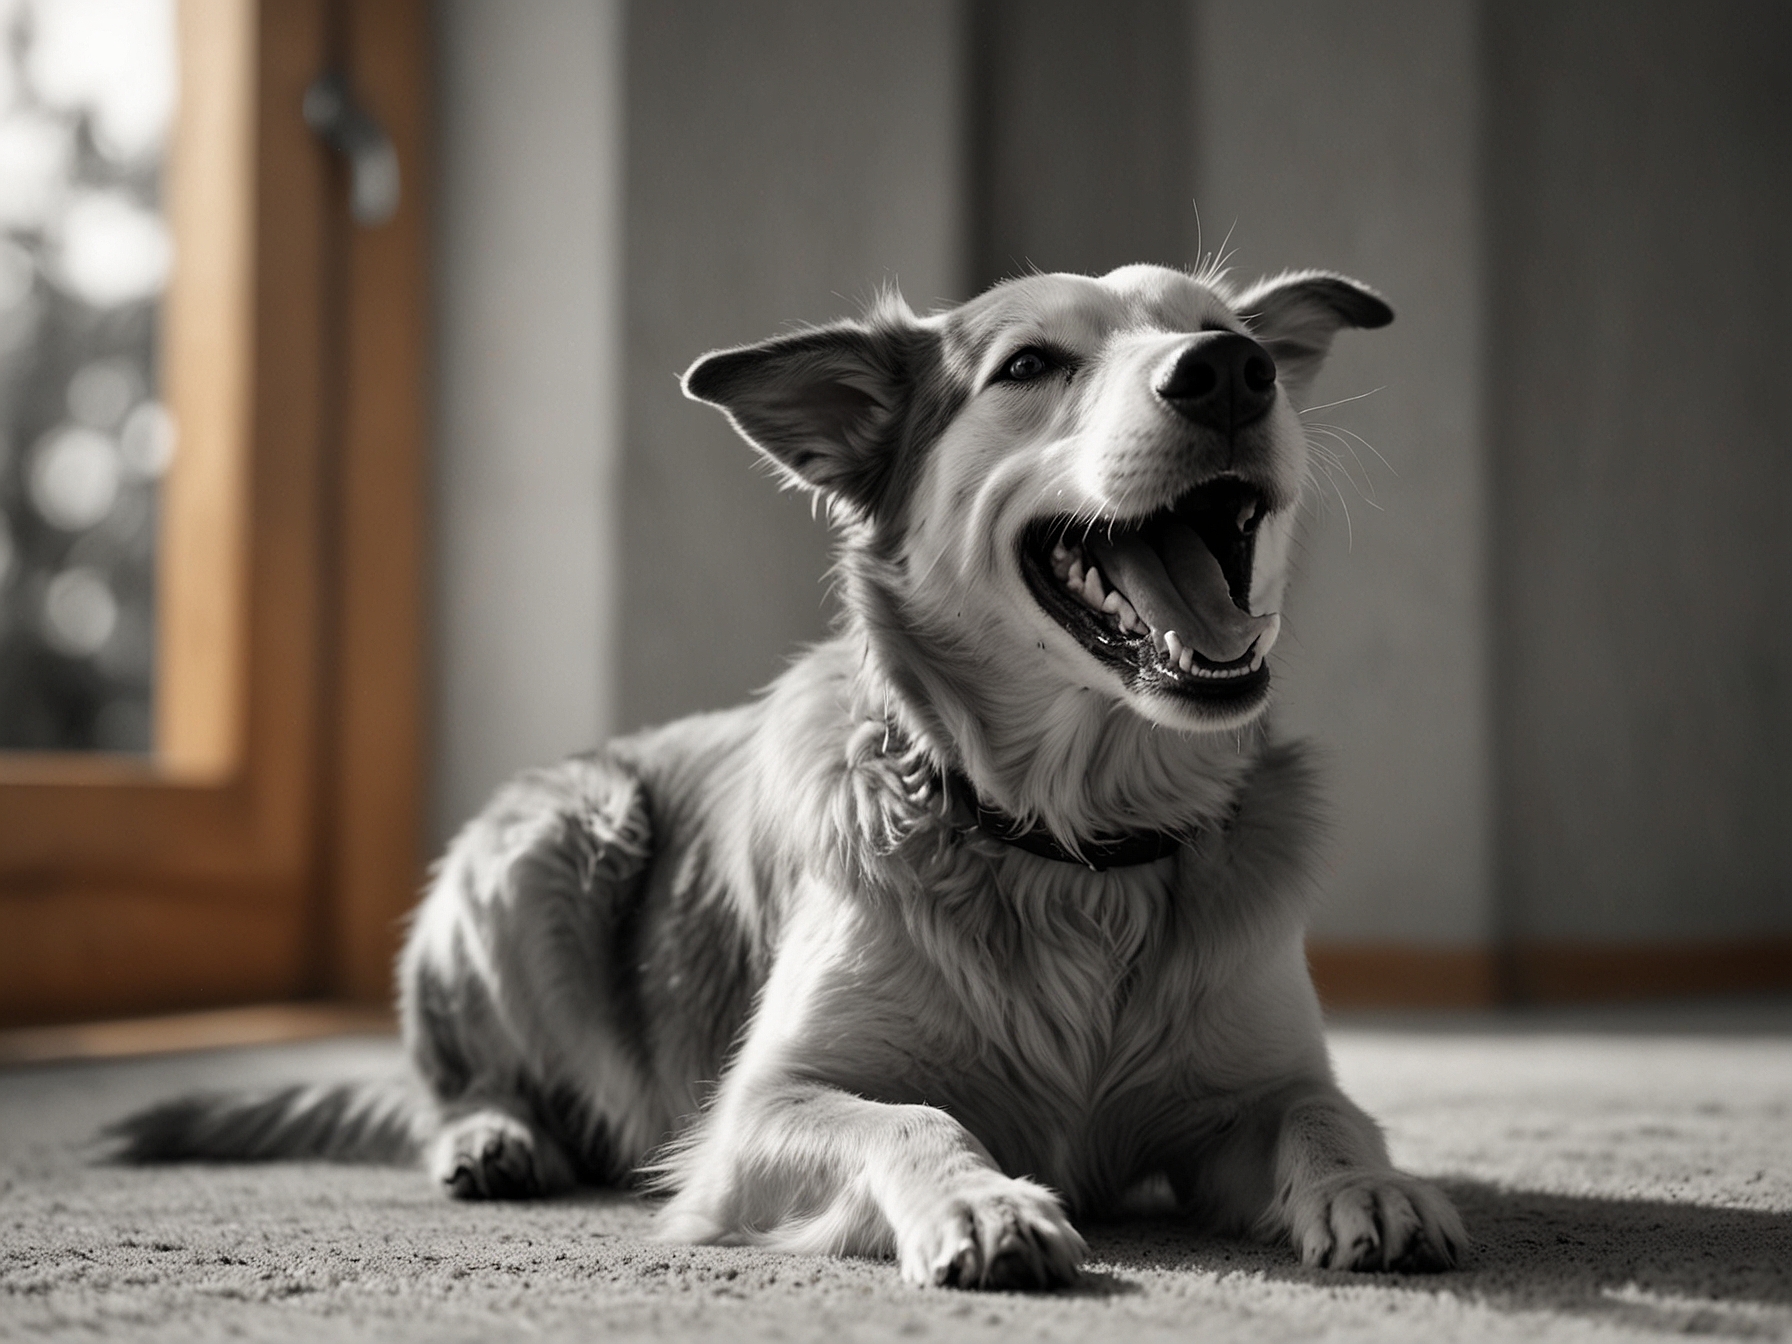 A happy dog with its ears perked up and tail wagging vigorously as it hears the word 'treats' from its owner, showcasing the joy and instant excitement the word brings.